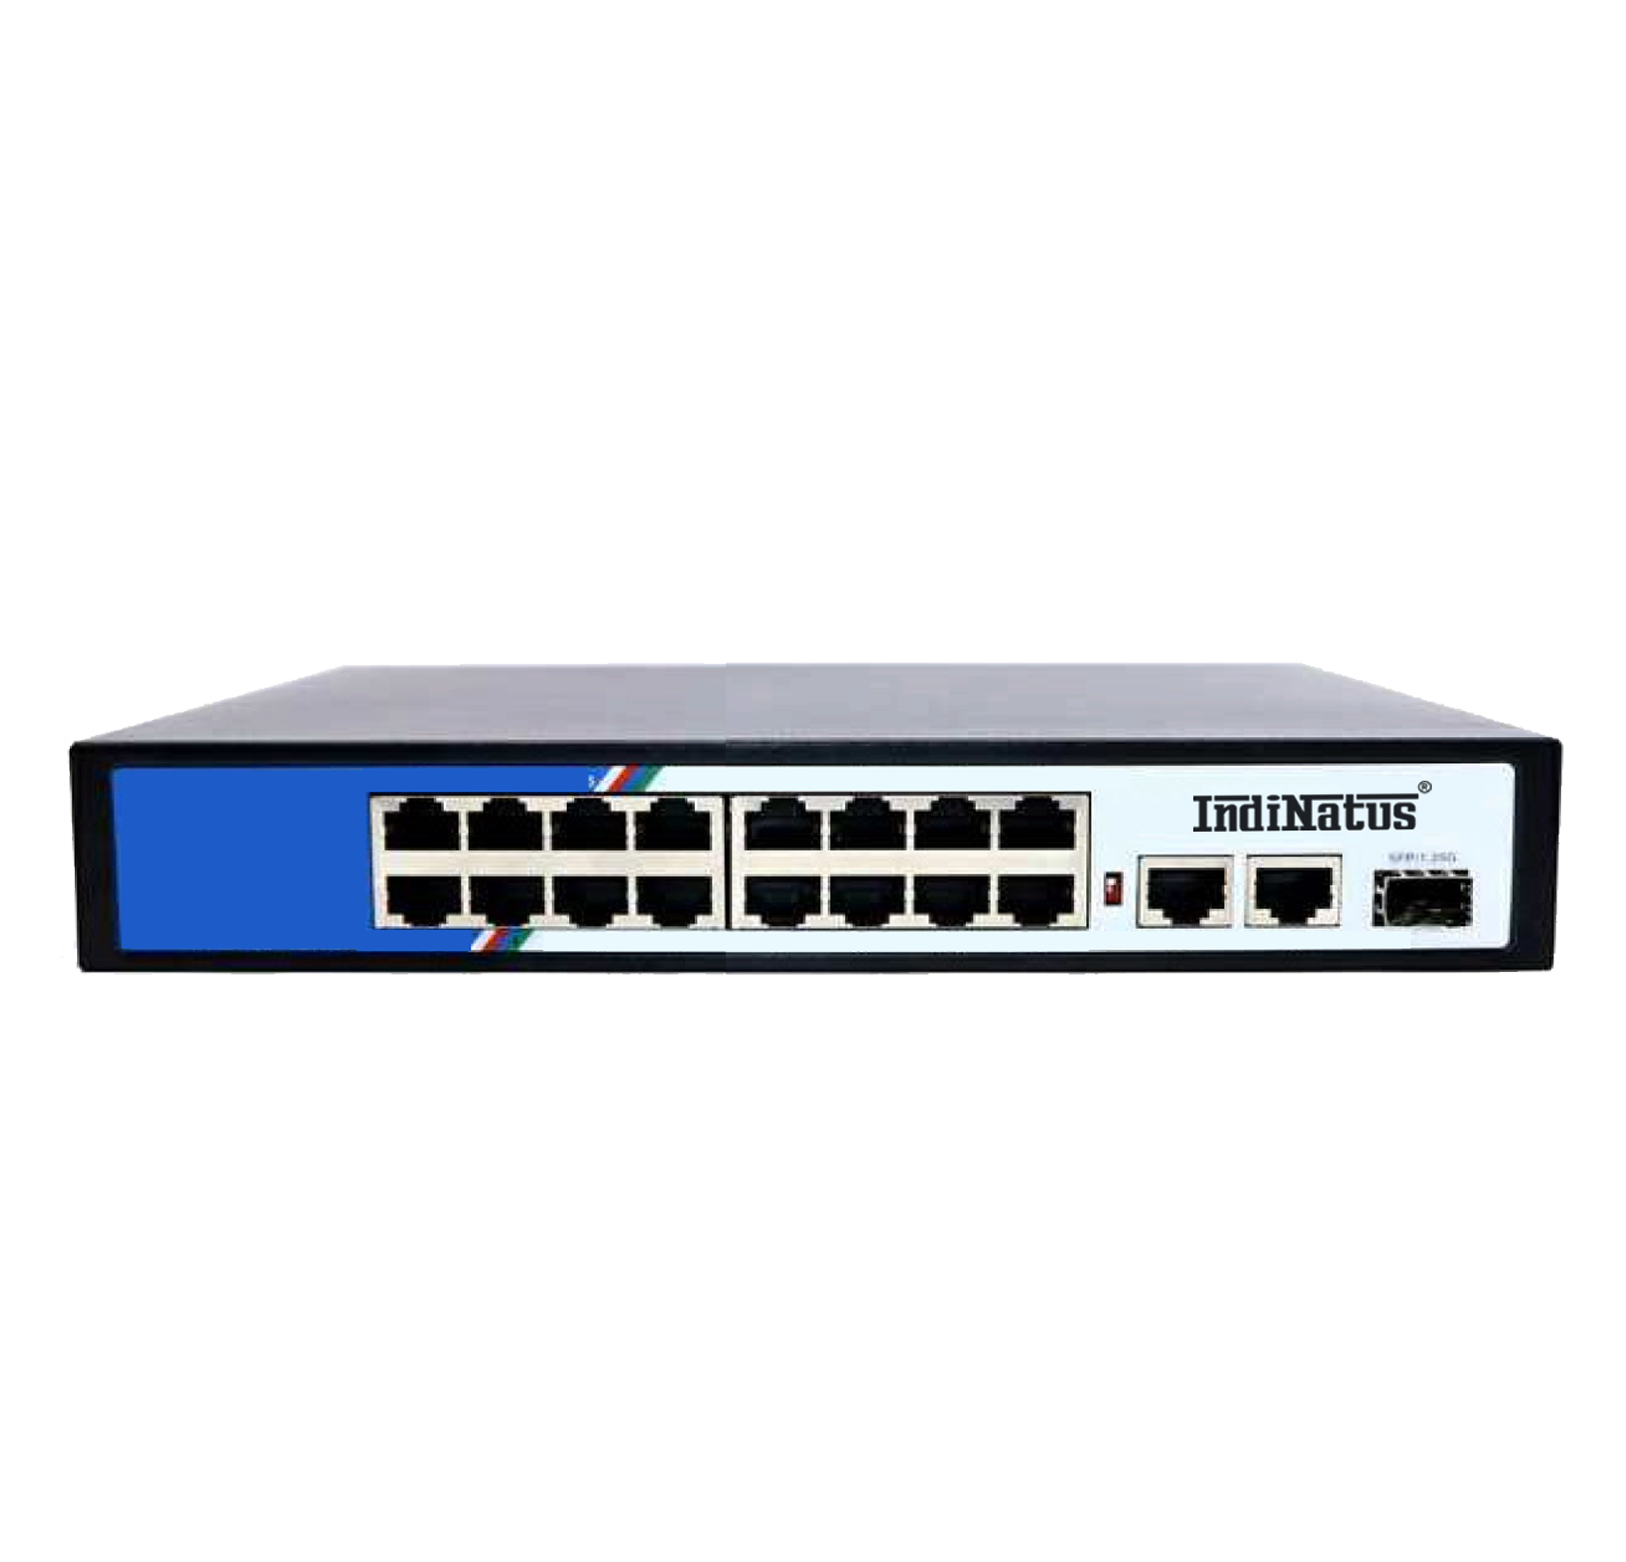  16-Port Gigabit PoE + 2-Port Gigabit SFP + 2-Port Gigabit Ethernet Switch, IN-PE1016G-2UF,  IndiNatus® India Private Limited - India Ka Apna Brand, Indian CCTV  Brand,  Make In India CCTV camera, Make in india cctv camera brand available on gem portal, IP Network Camera, Indian brand CCTV Camera, Best OEM Of CCTV in India      